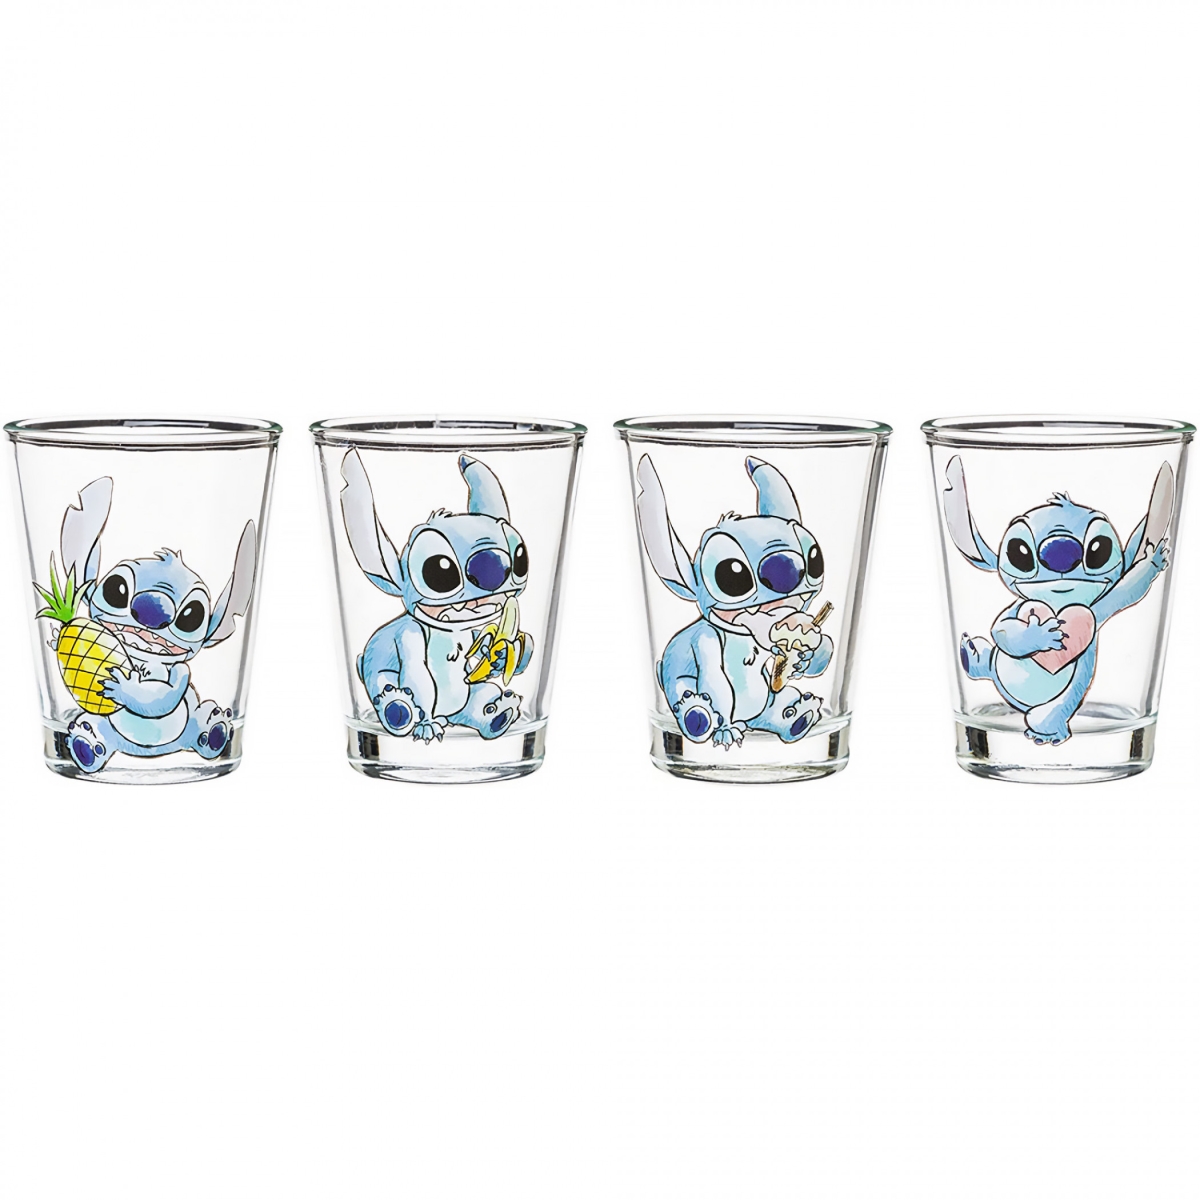 Picture of Lilo & Stitch 852193 Disney Sweets Shot Glass Set - Pack of 4